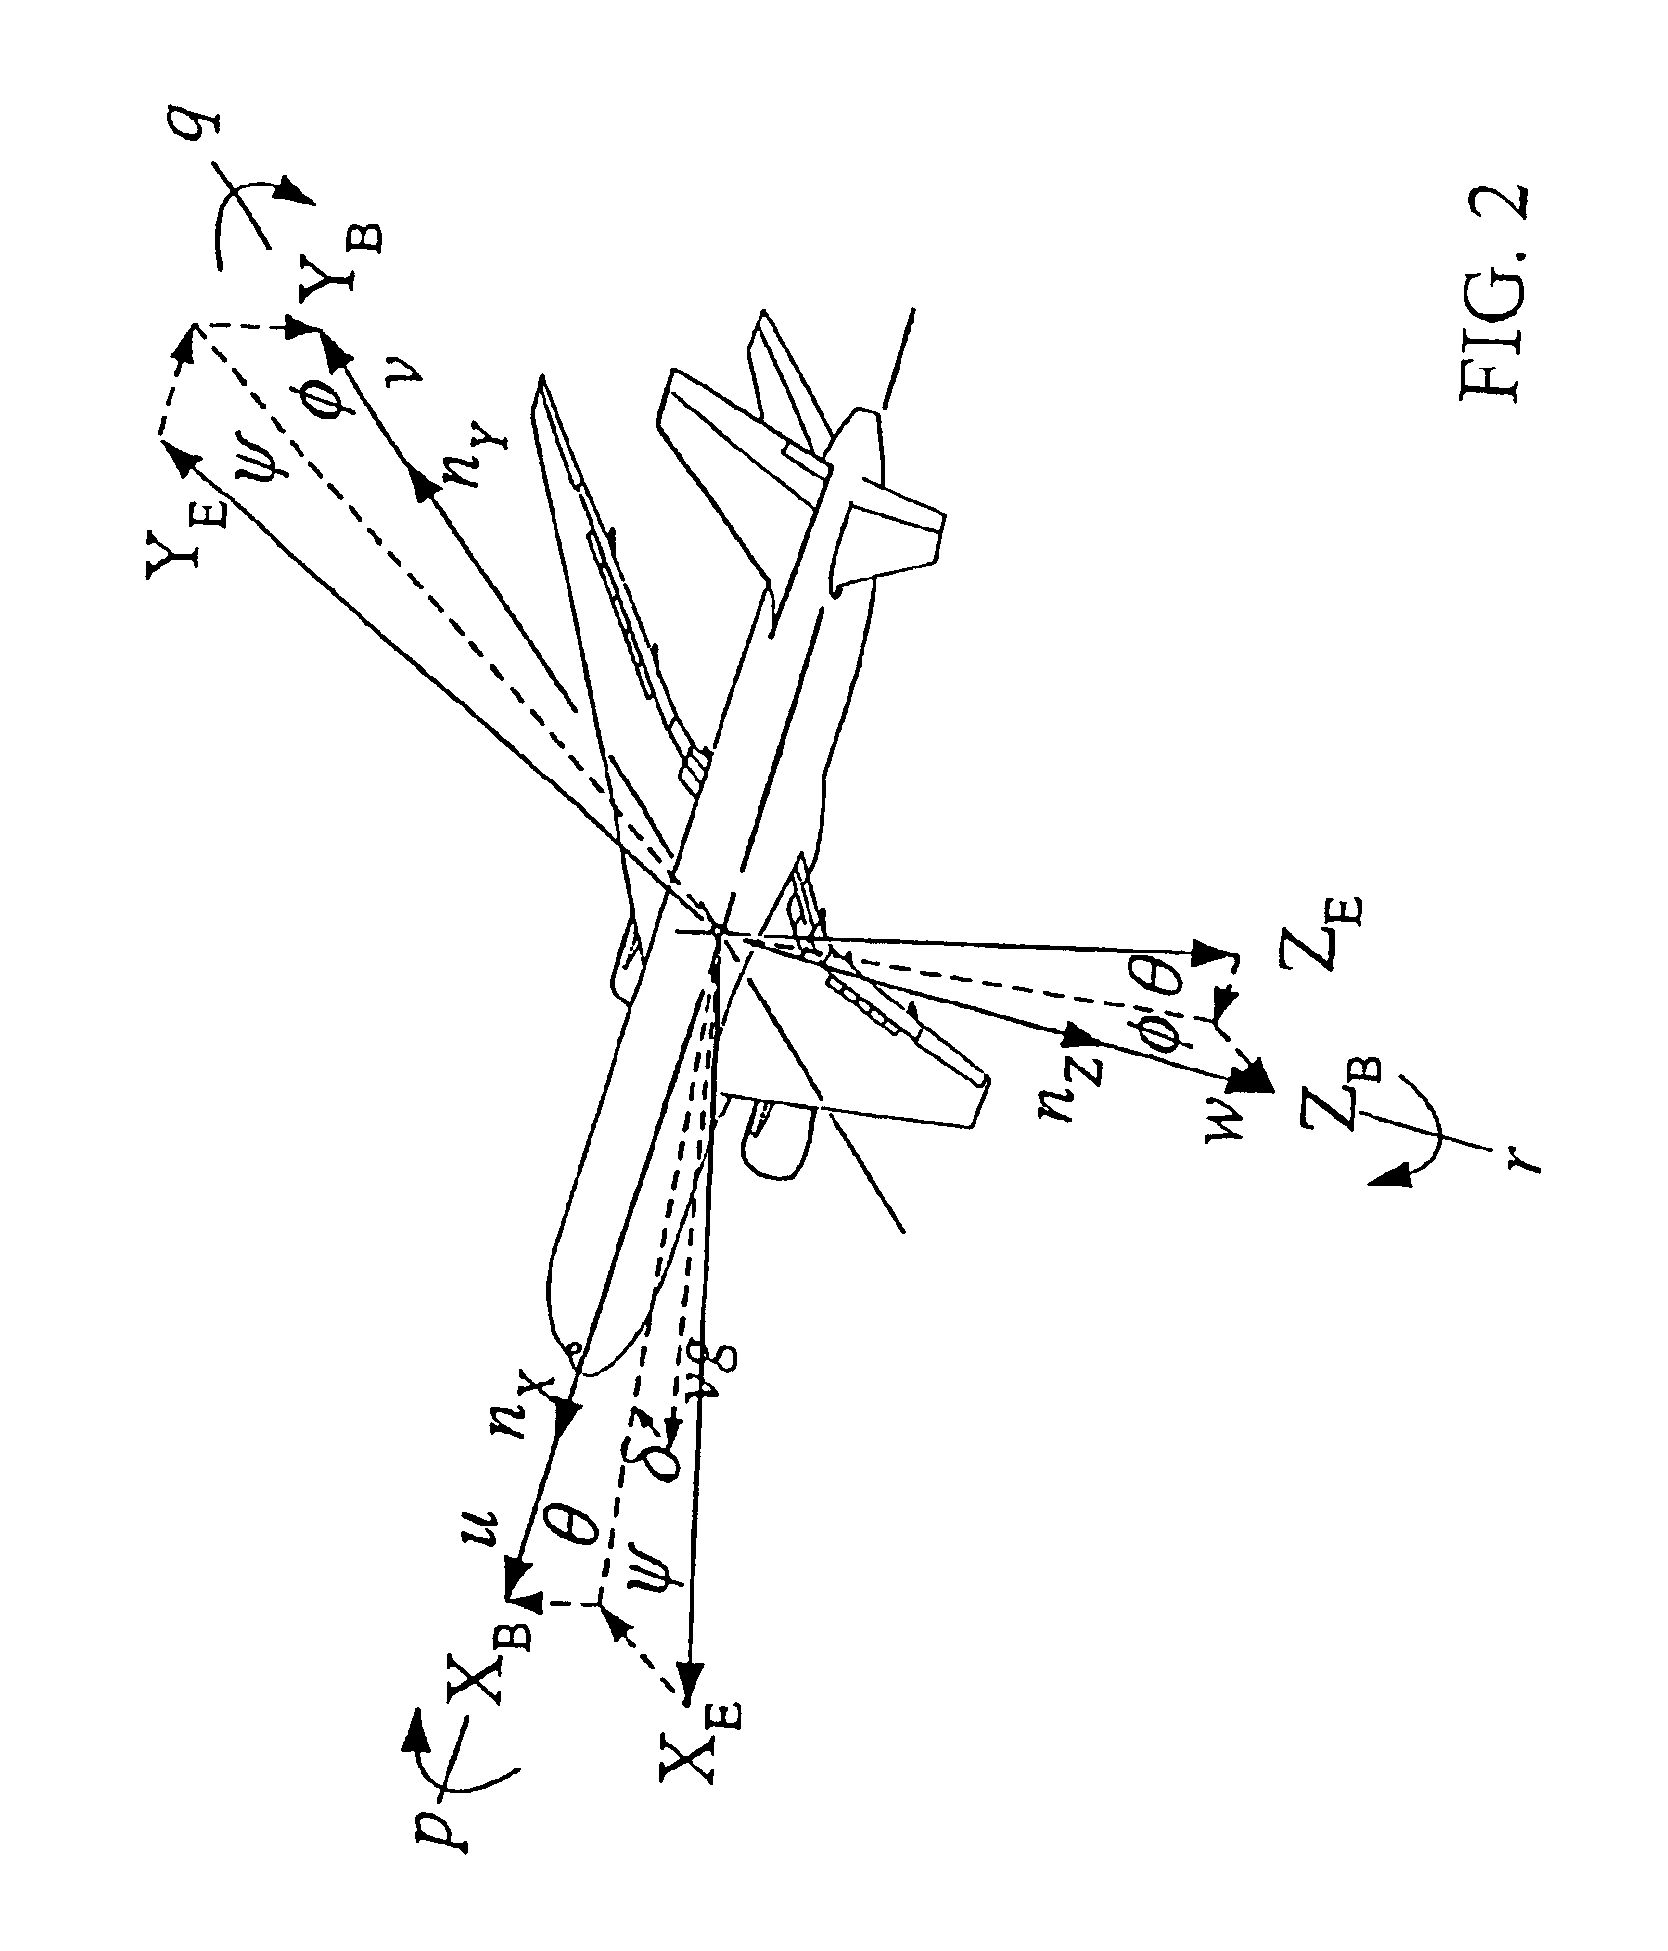 System and method for kinematic consistency processing